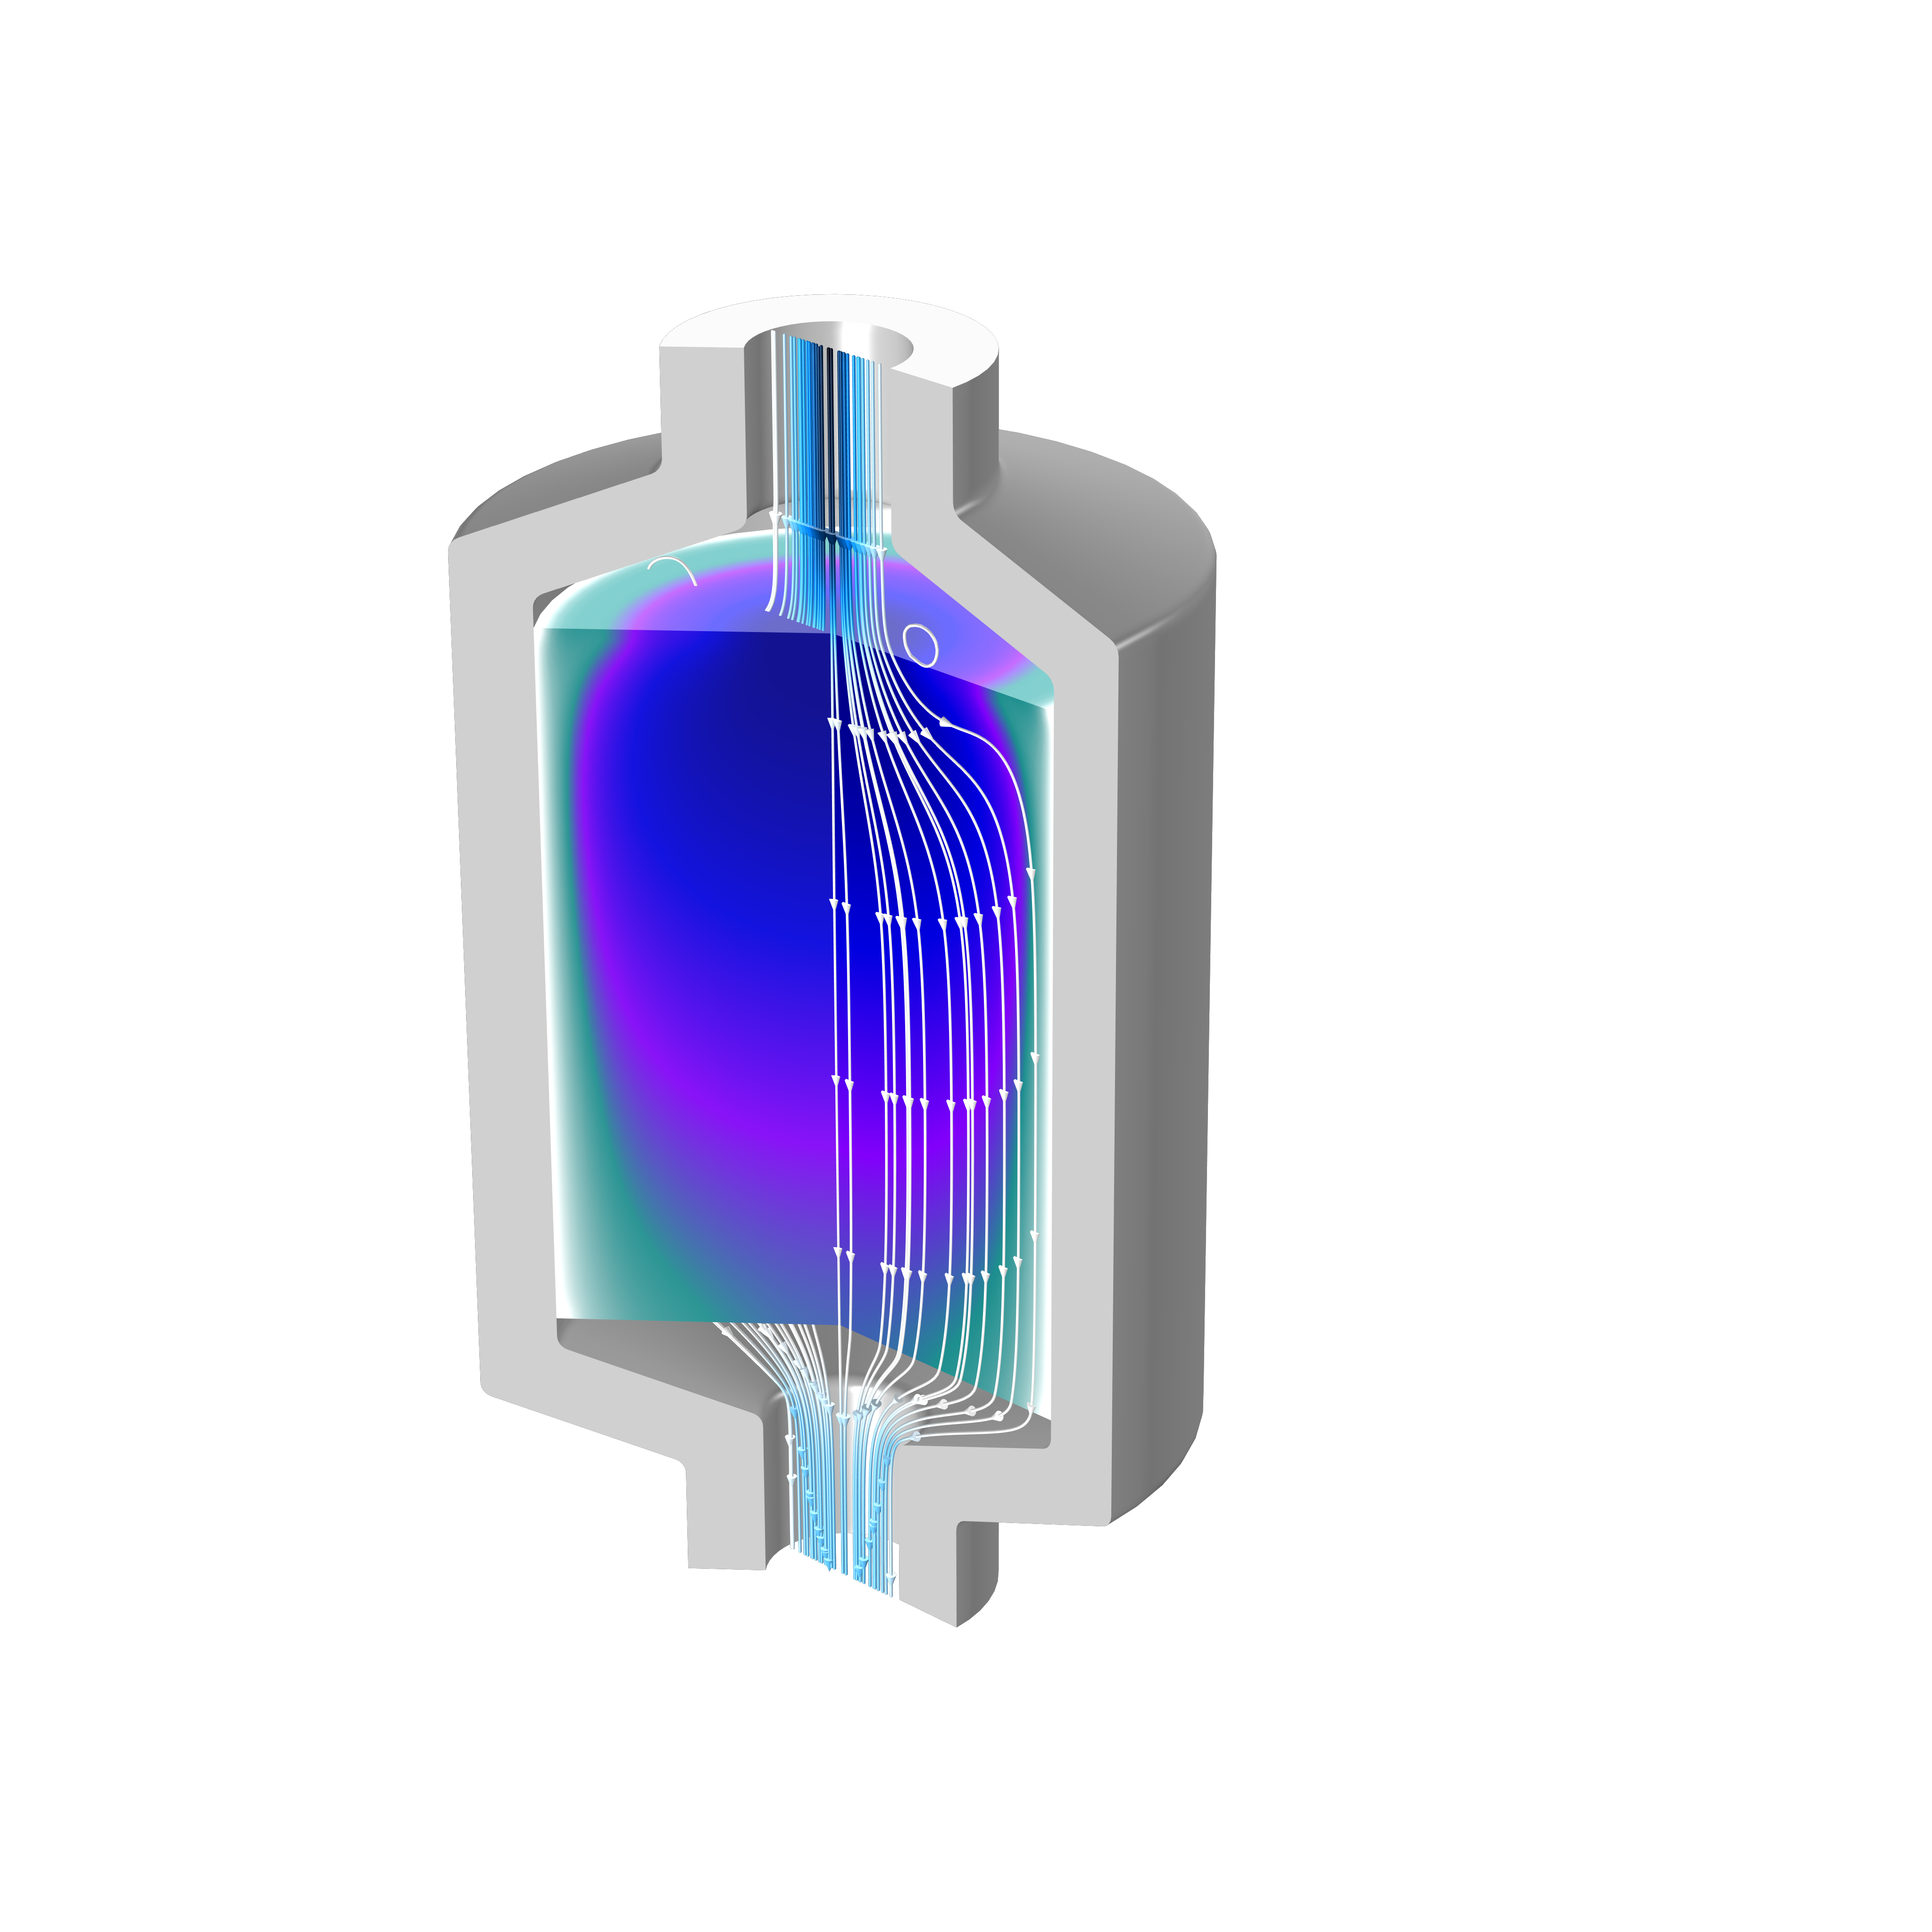 A gray tank model with porous media flow shown in teal, purple, and blue color gradient and white streamlines.